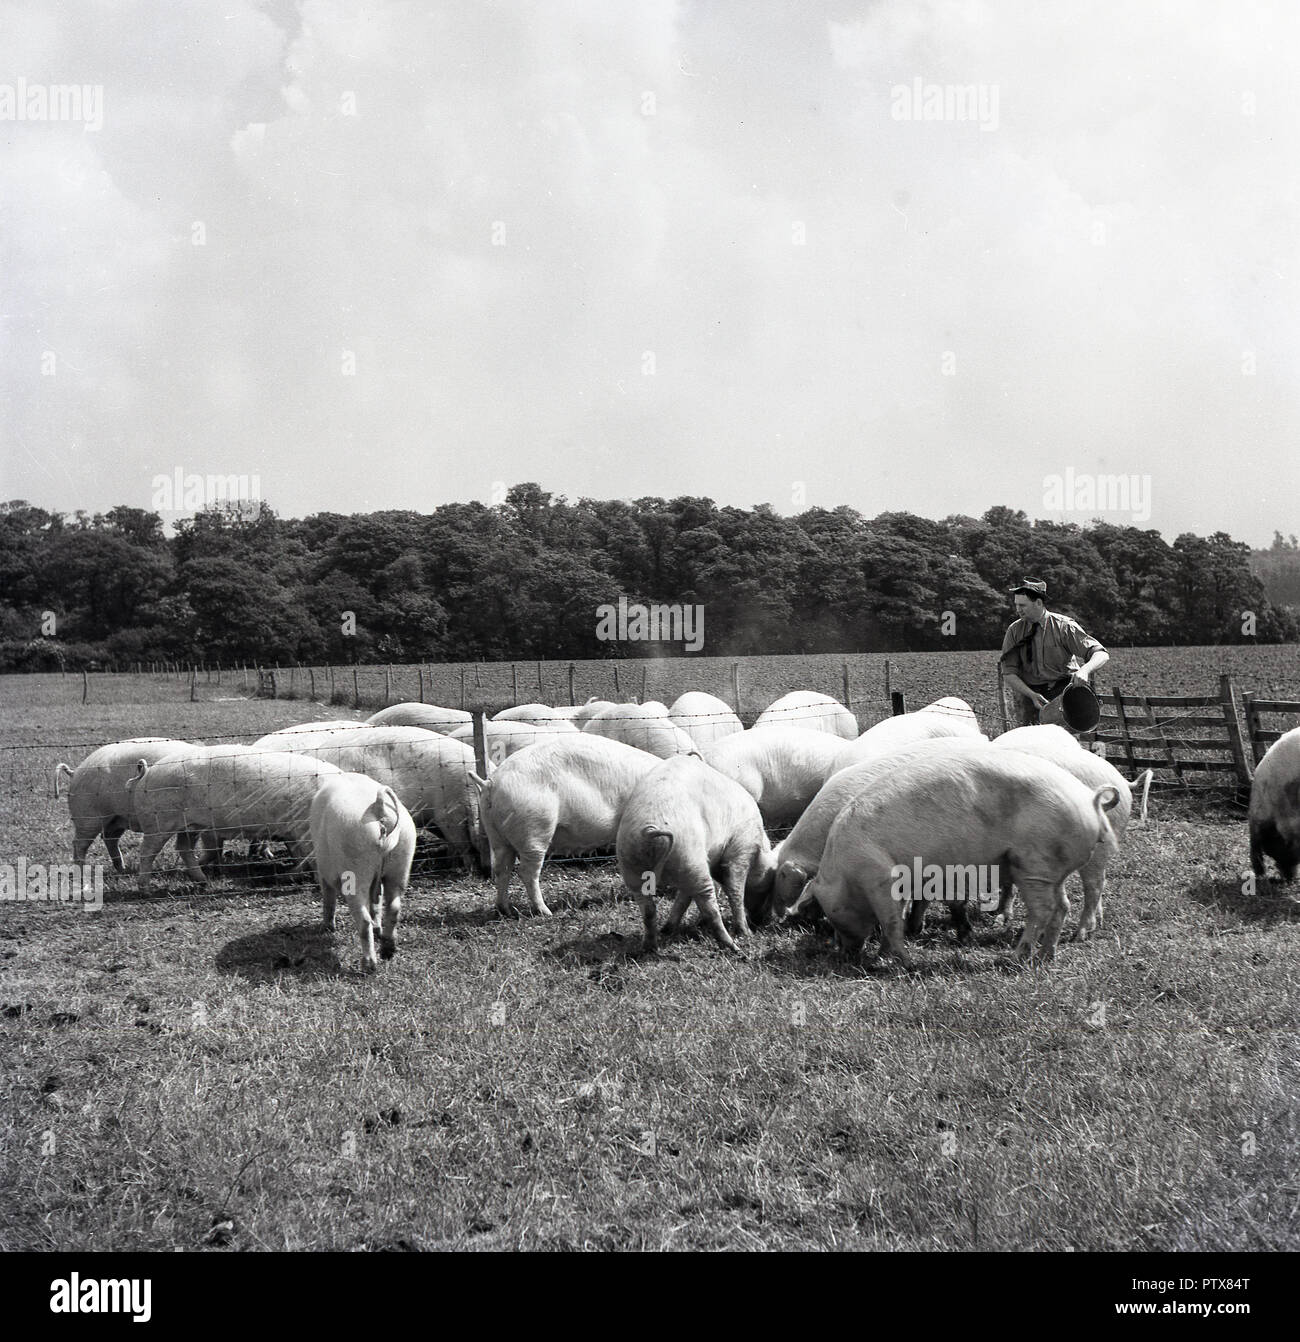 1950s, historical, British farming, pigs outdoors in an enclosed field eating feed being given out by a farmer, Engalnd, UK. Stock Photo